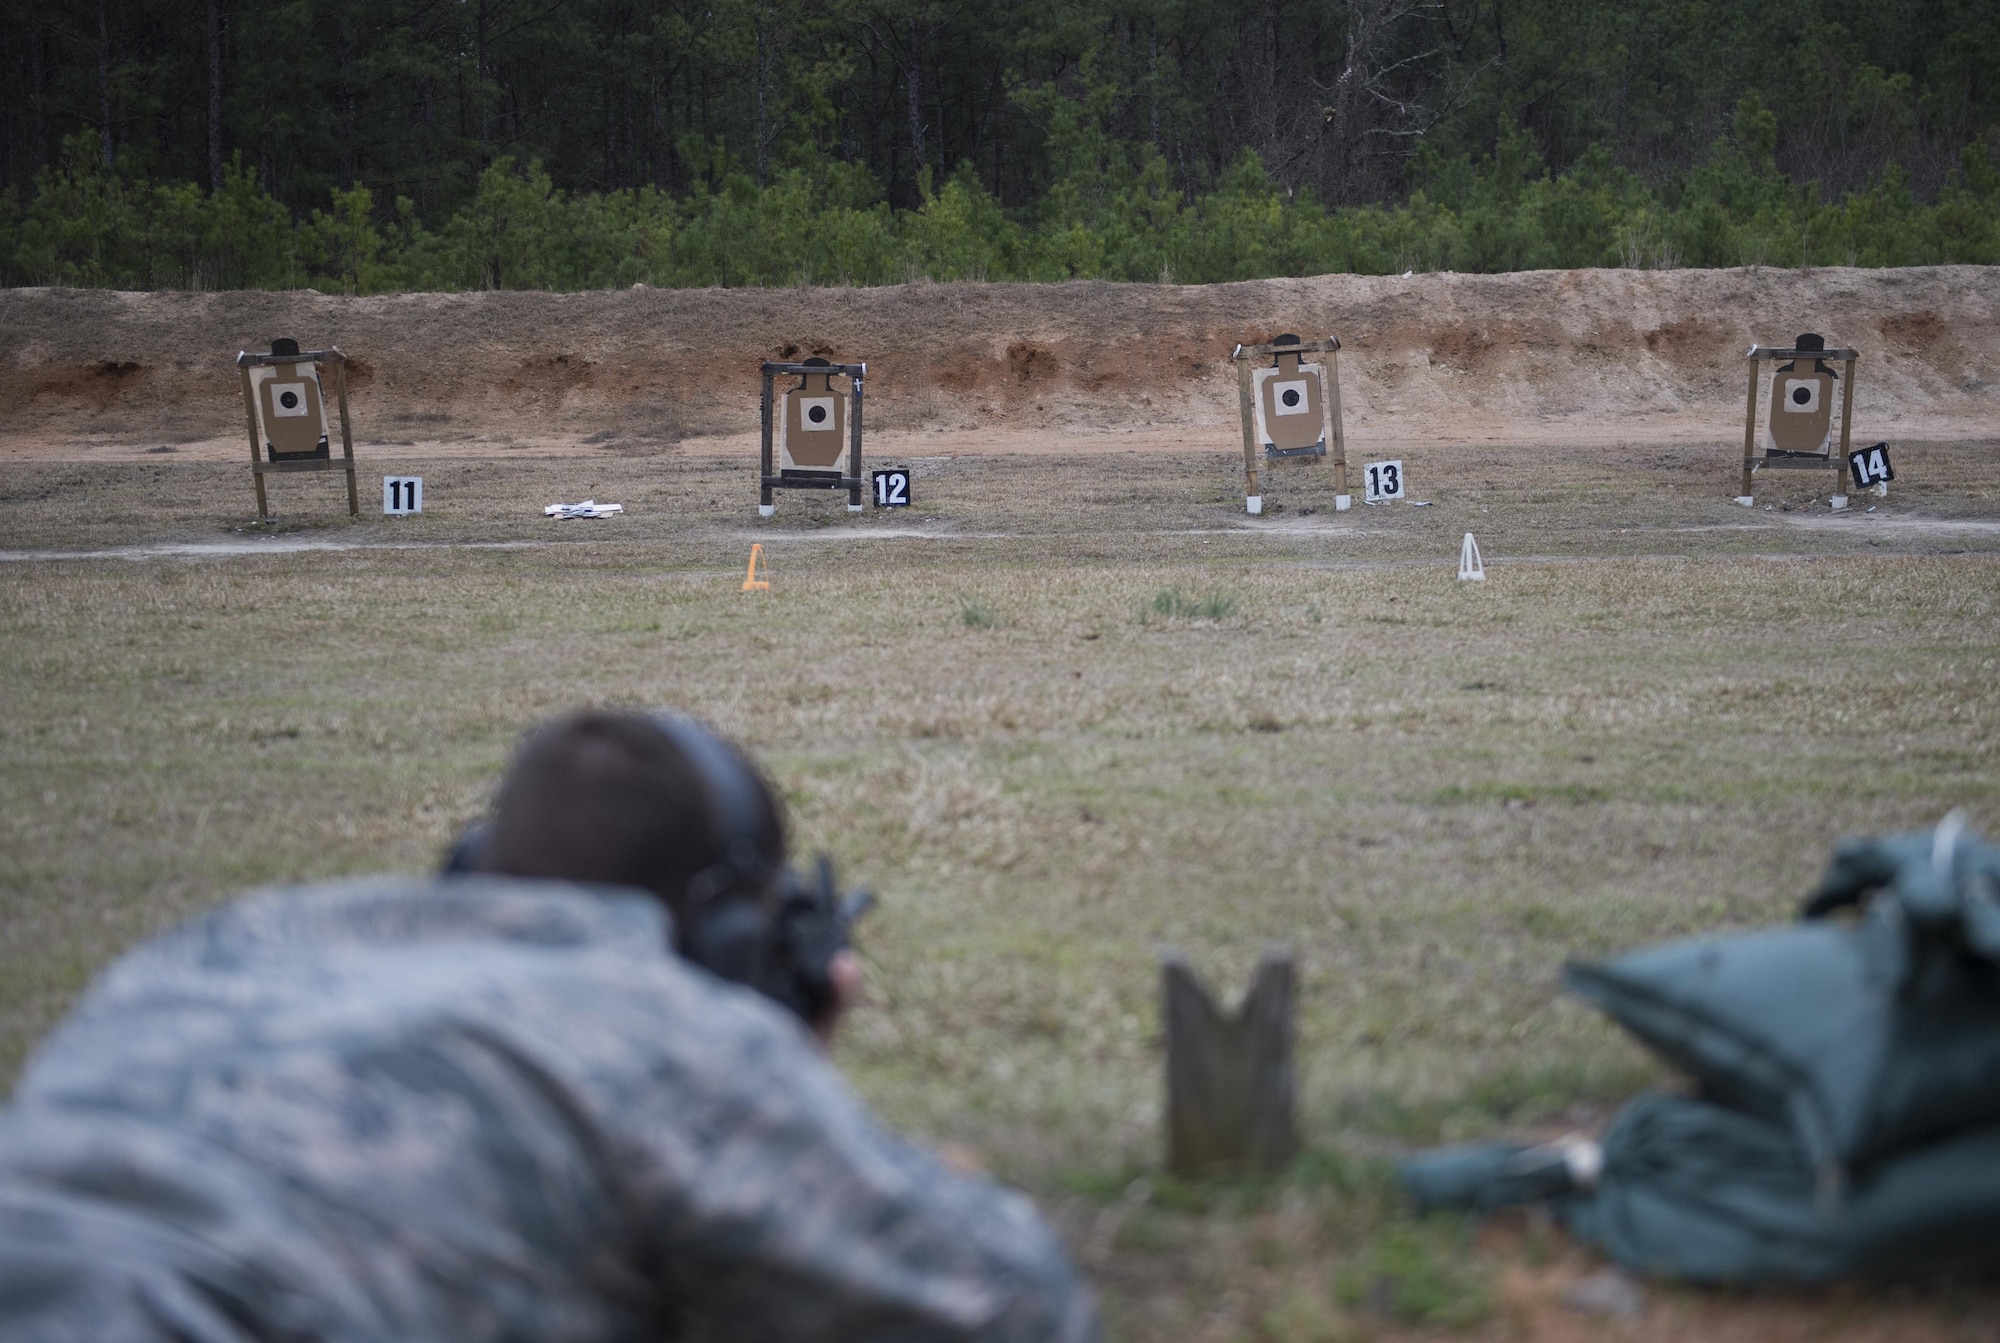 A combat camera Airman fires at a paper target March 3, 2016, during exercise Scorpion Lens 2016, at McCrady Training Center on Fort Jackson, S.C. The exercise is an annual training requirement incorporating combat camera job qualification standards and advanced weapons and tactical training with Army instructors. (U.S. Air Force photo/Staff Sgt. Jared Trimarchi)